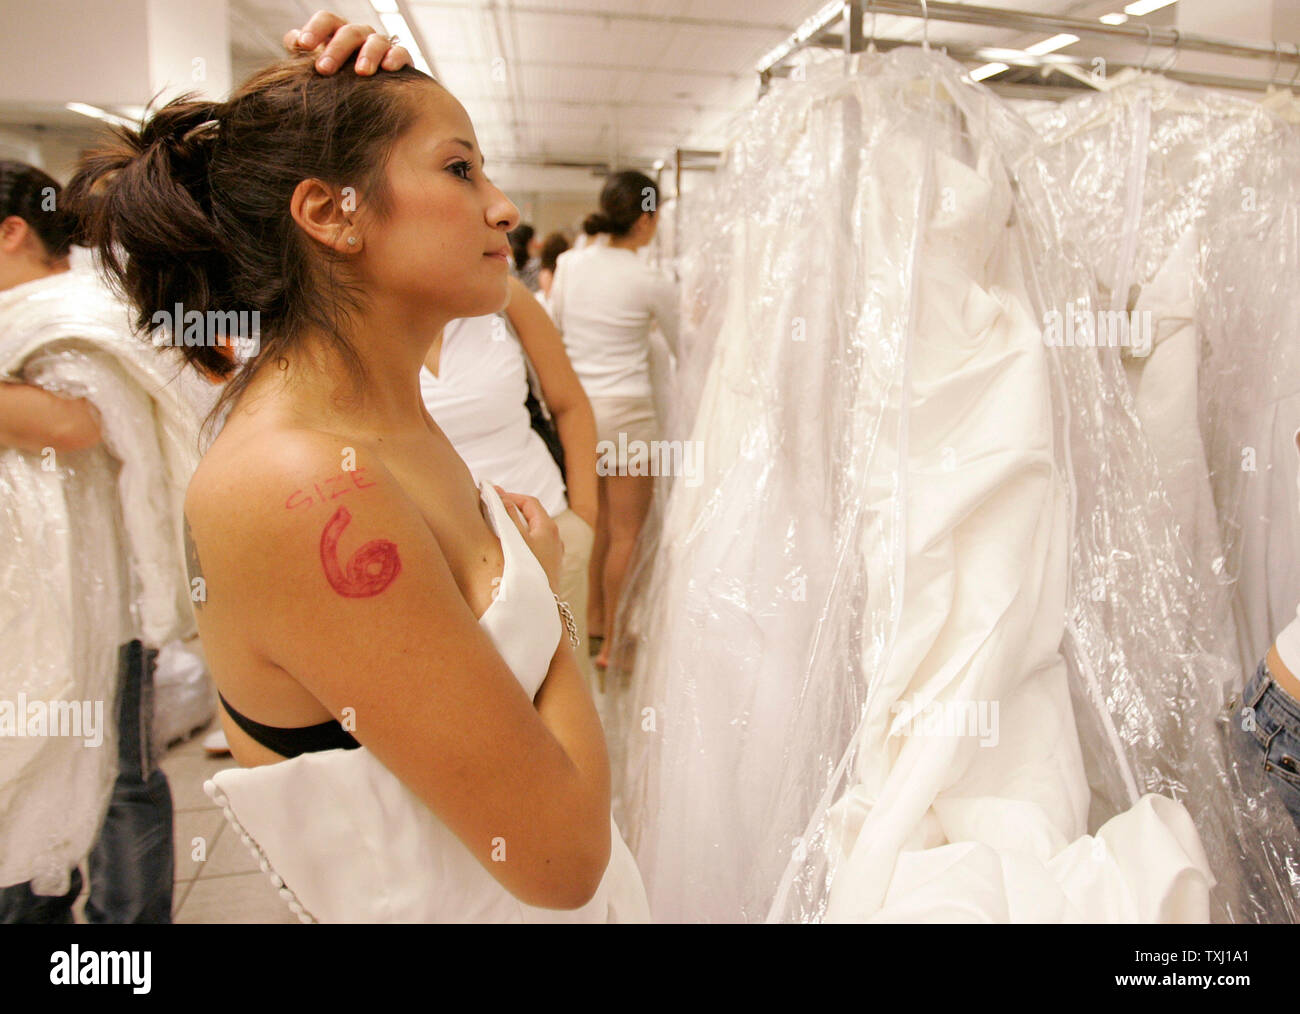 Running Brides High Resolution Stock Photography And Images Alamy